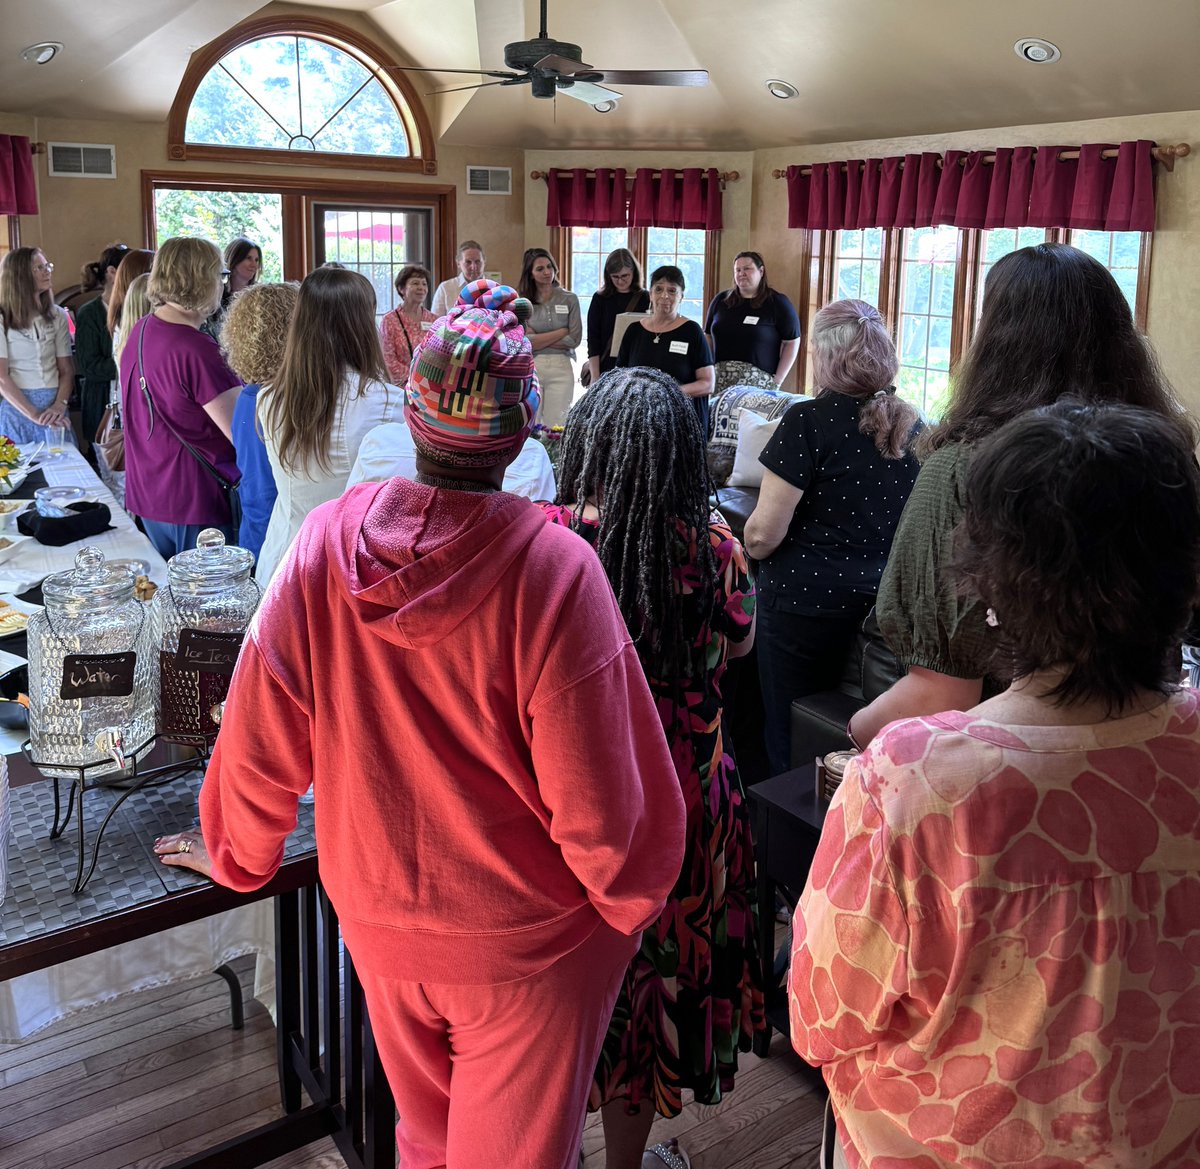 The Rev. Ruth Faith Santana-Grace hosted over 25 women serving in congregational ministry at her home earlier today. It was a time of fellowship and connection. #presbyphl #pcusa